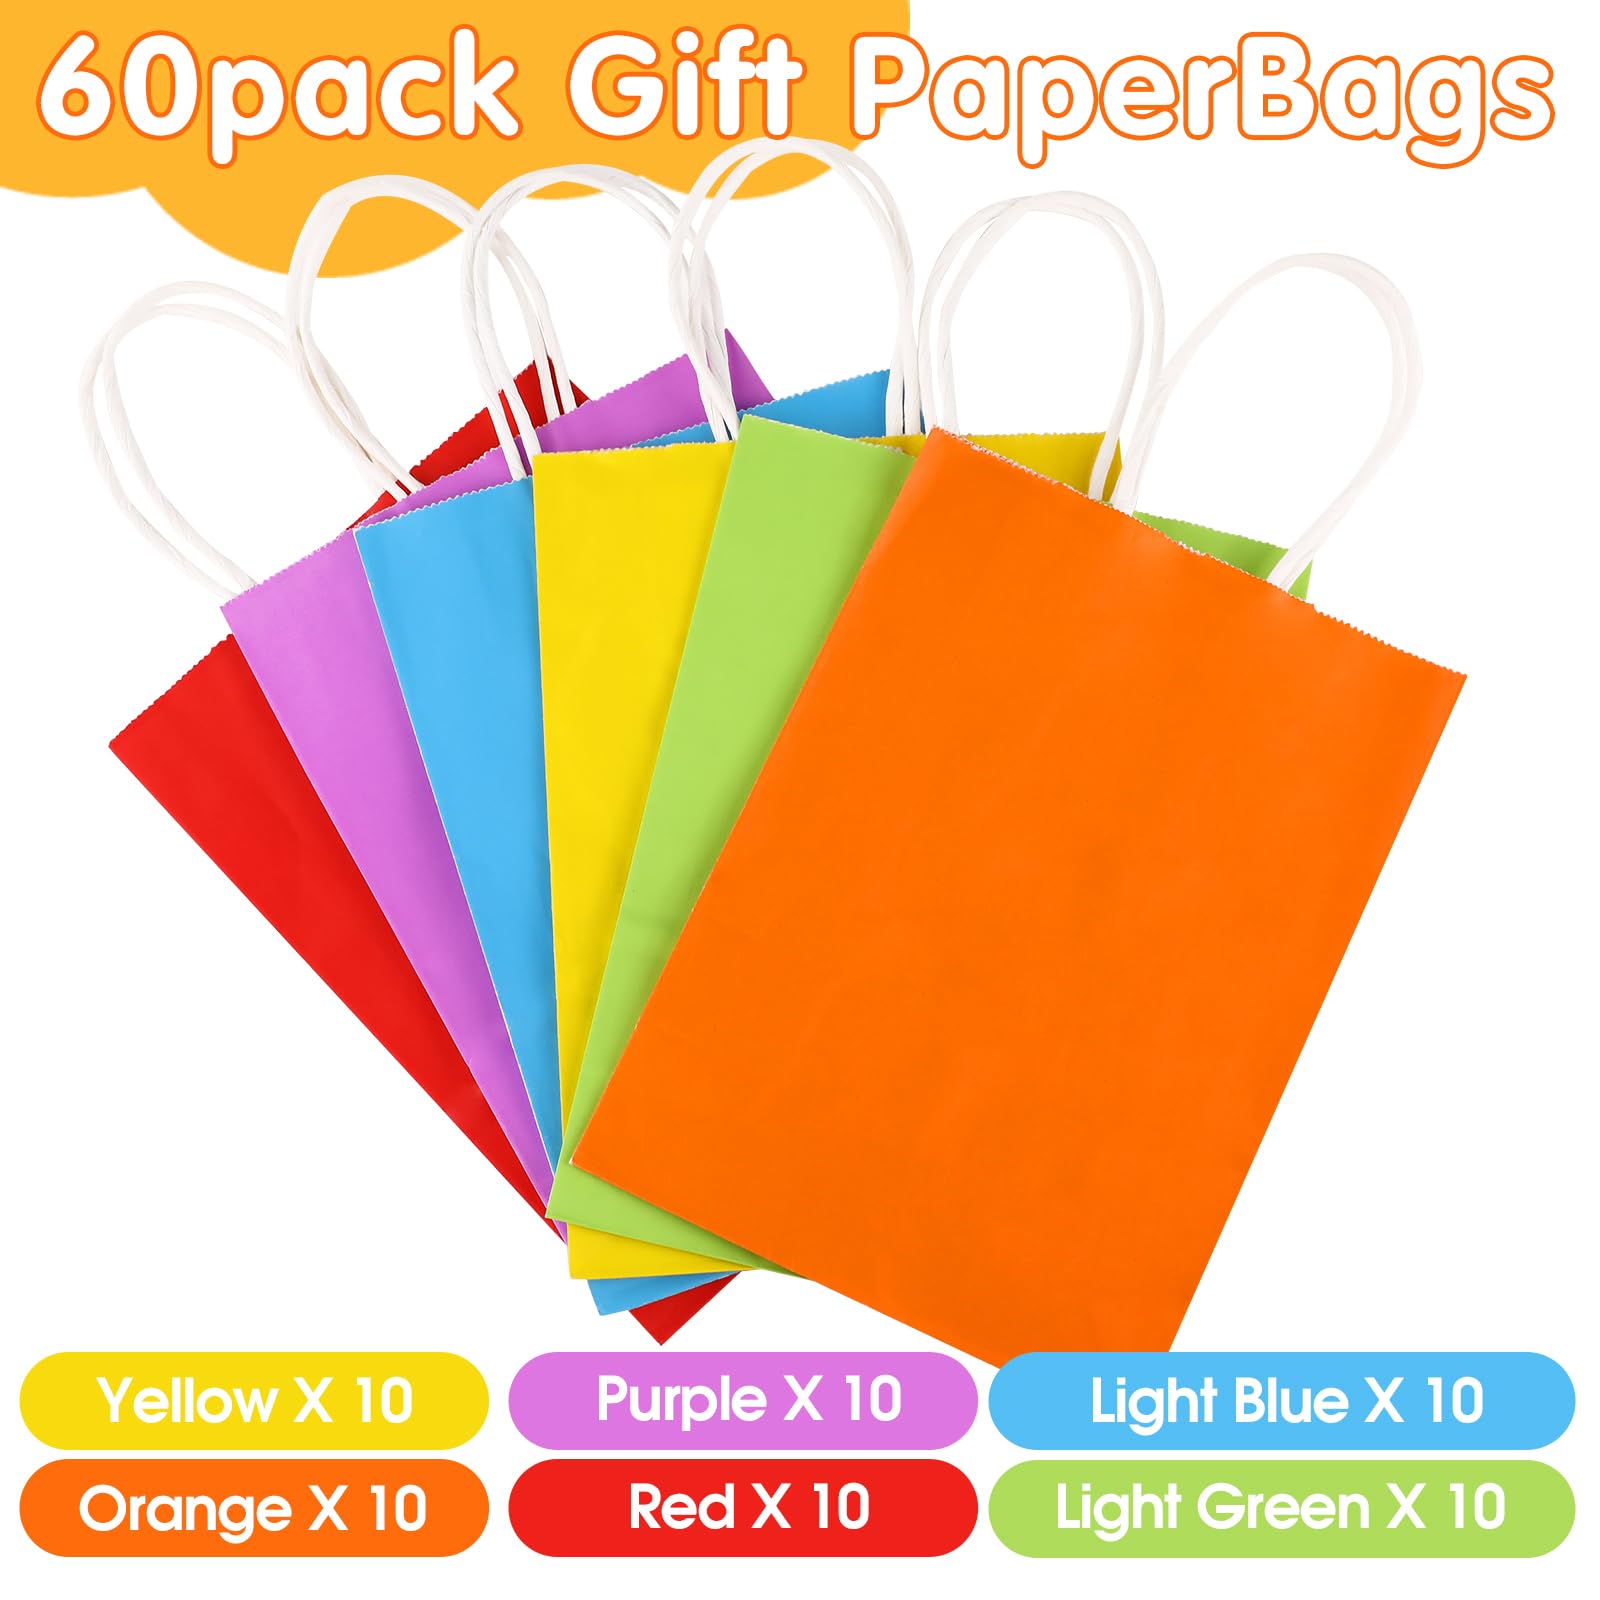 XPCARE 60 Pieces Gift Bags Bulk, 6 Colors Party Favor Bags with Handles, 6.3x3.15x8.66'' Small Rainbow Gift Bags for Kids Birthday, Baby Shower, Crafts, Wedding, Party Supplies…